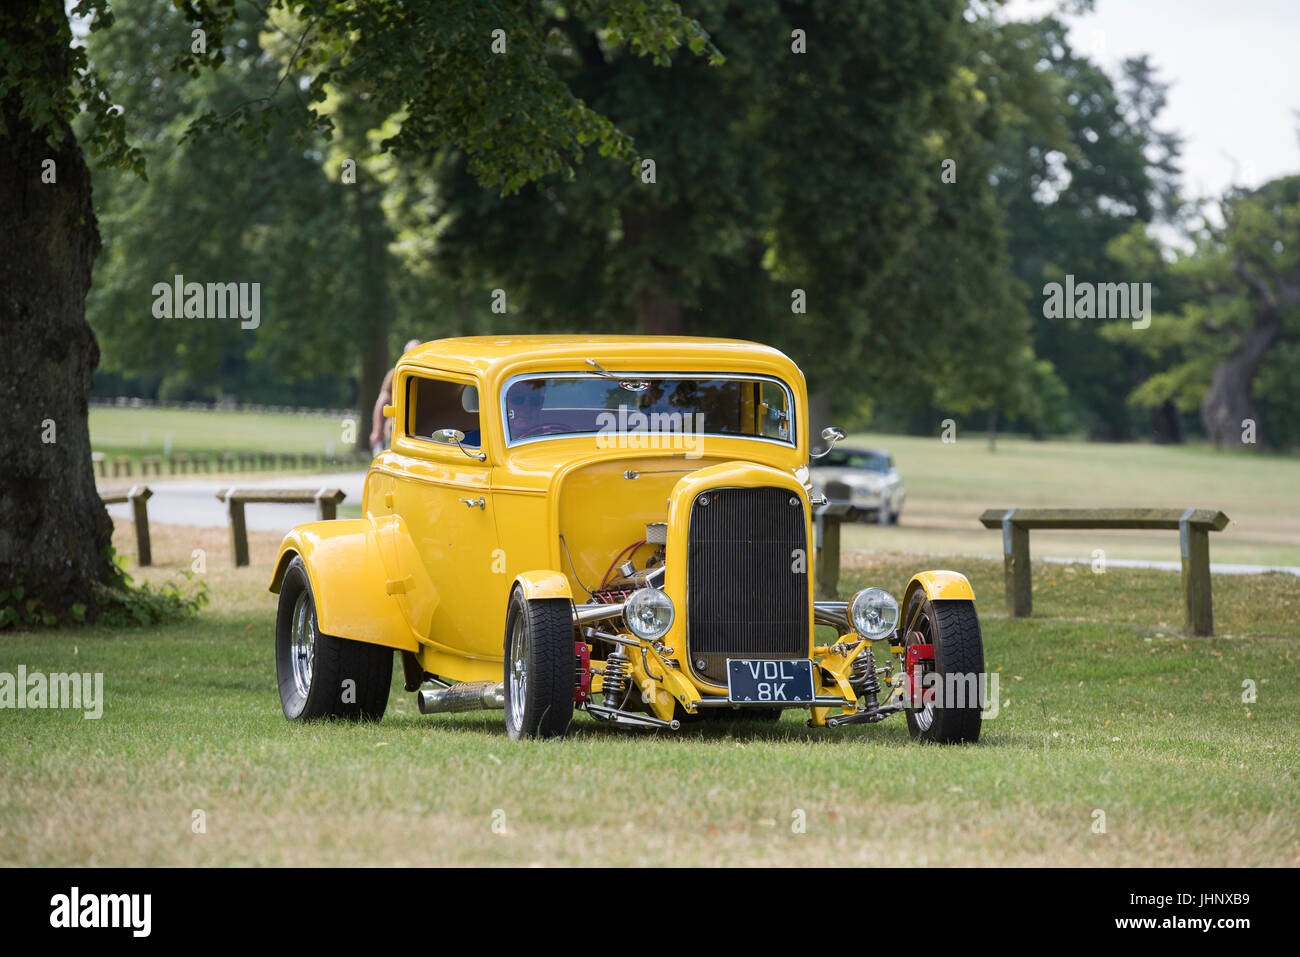 Yellow Custom Ford Hotrod at Rally of the Giants american car show, Blenheim palace, Oxfordshire, England. Classic vintage American car Stock Photo